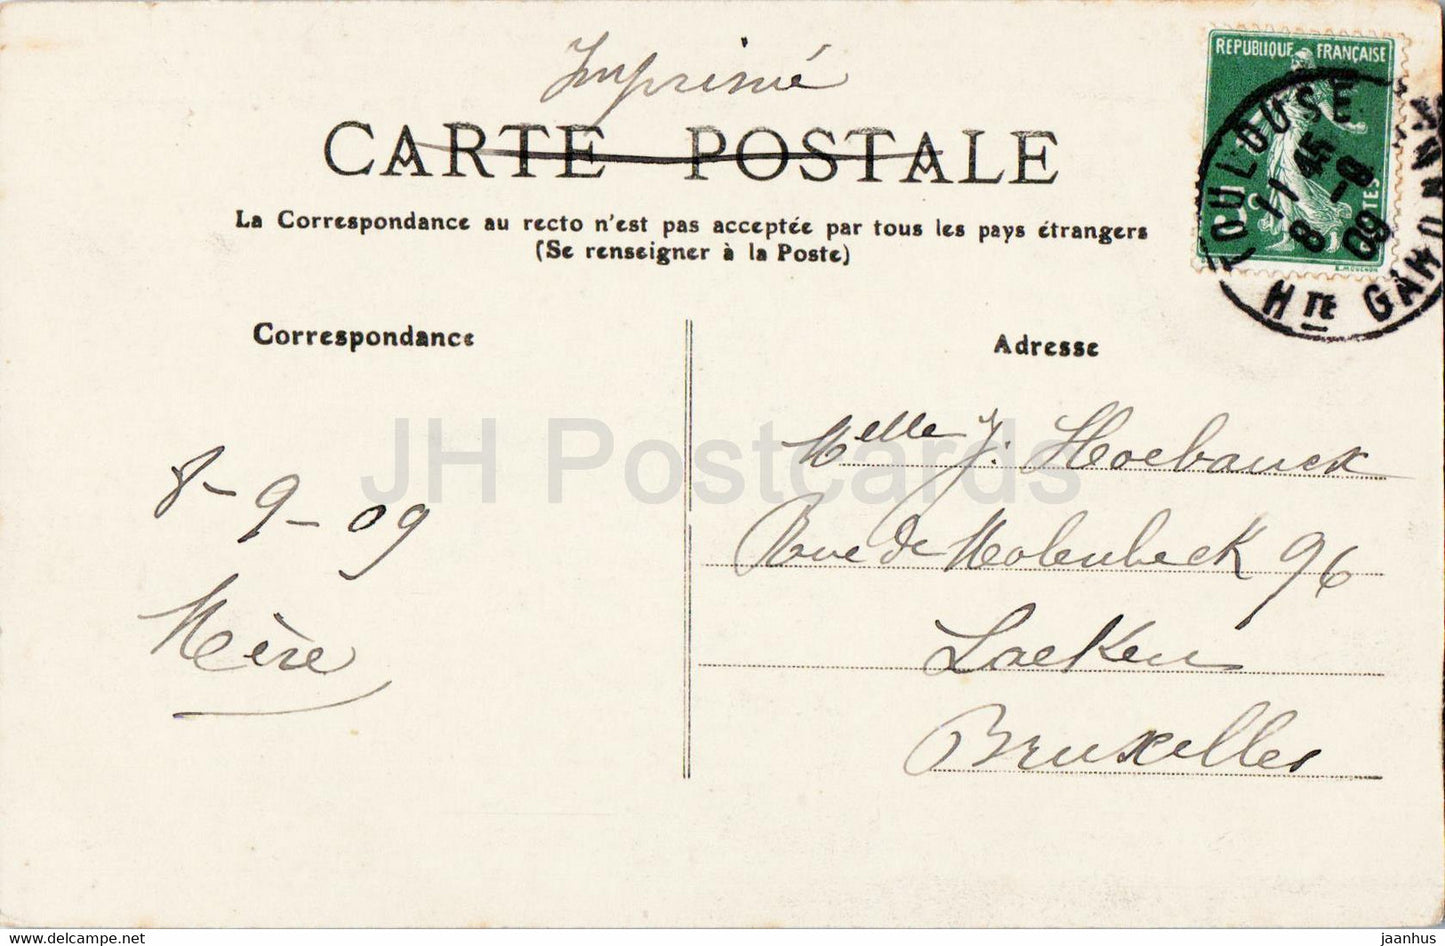 Toulouse - Vue Generale - 38 - old postcard - 1909 - France - used